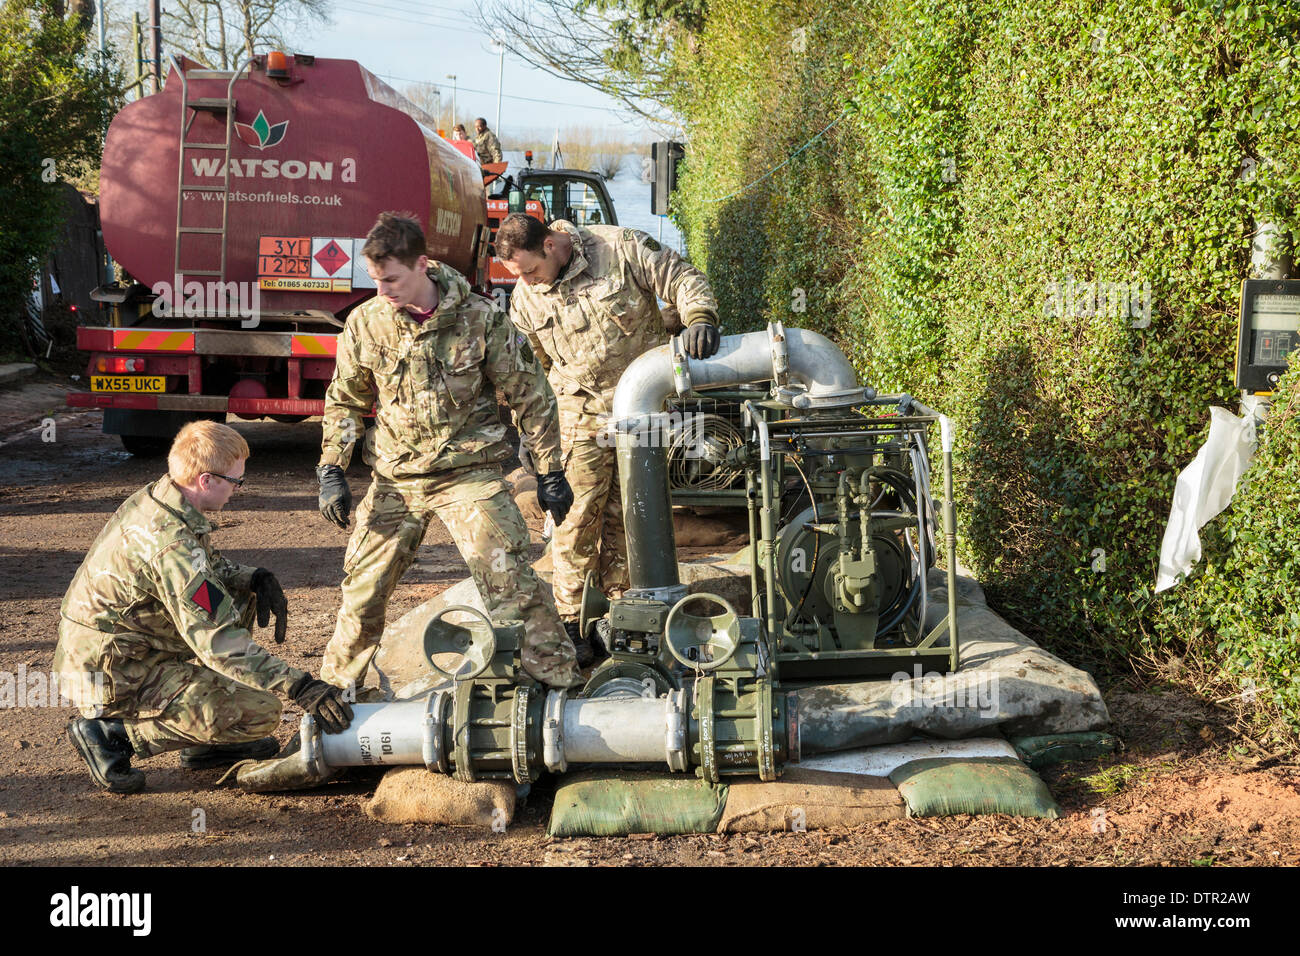 Burrowbridge, UK. 22nd Feb, 2014. A new pump flown in by Merlin helicopter is being made operational by Army Commandos at Burrowbridge on February 22, 2014. The pump will supply Saltmoor Pumping Station, run by the Environment Agency, with diesel fuel for its addiitional water pumps that have been installed to remove the high volume of flood water from the surrounding fields around Northmoor and village of Moorland and pump it into the River Parrett where it is carried away by the tide. This is the worst flooding on the Somerset Levels in living history. Stock Photo